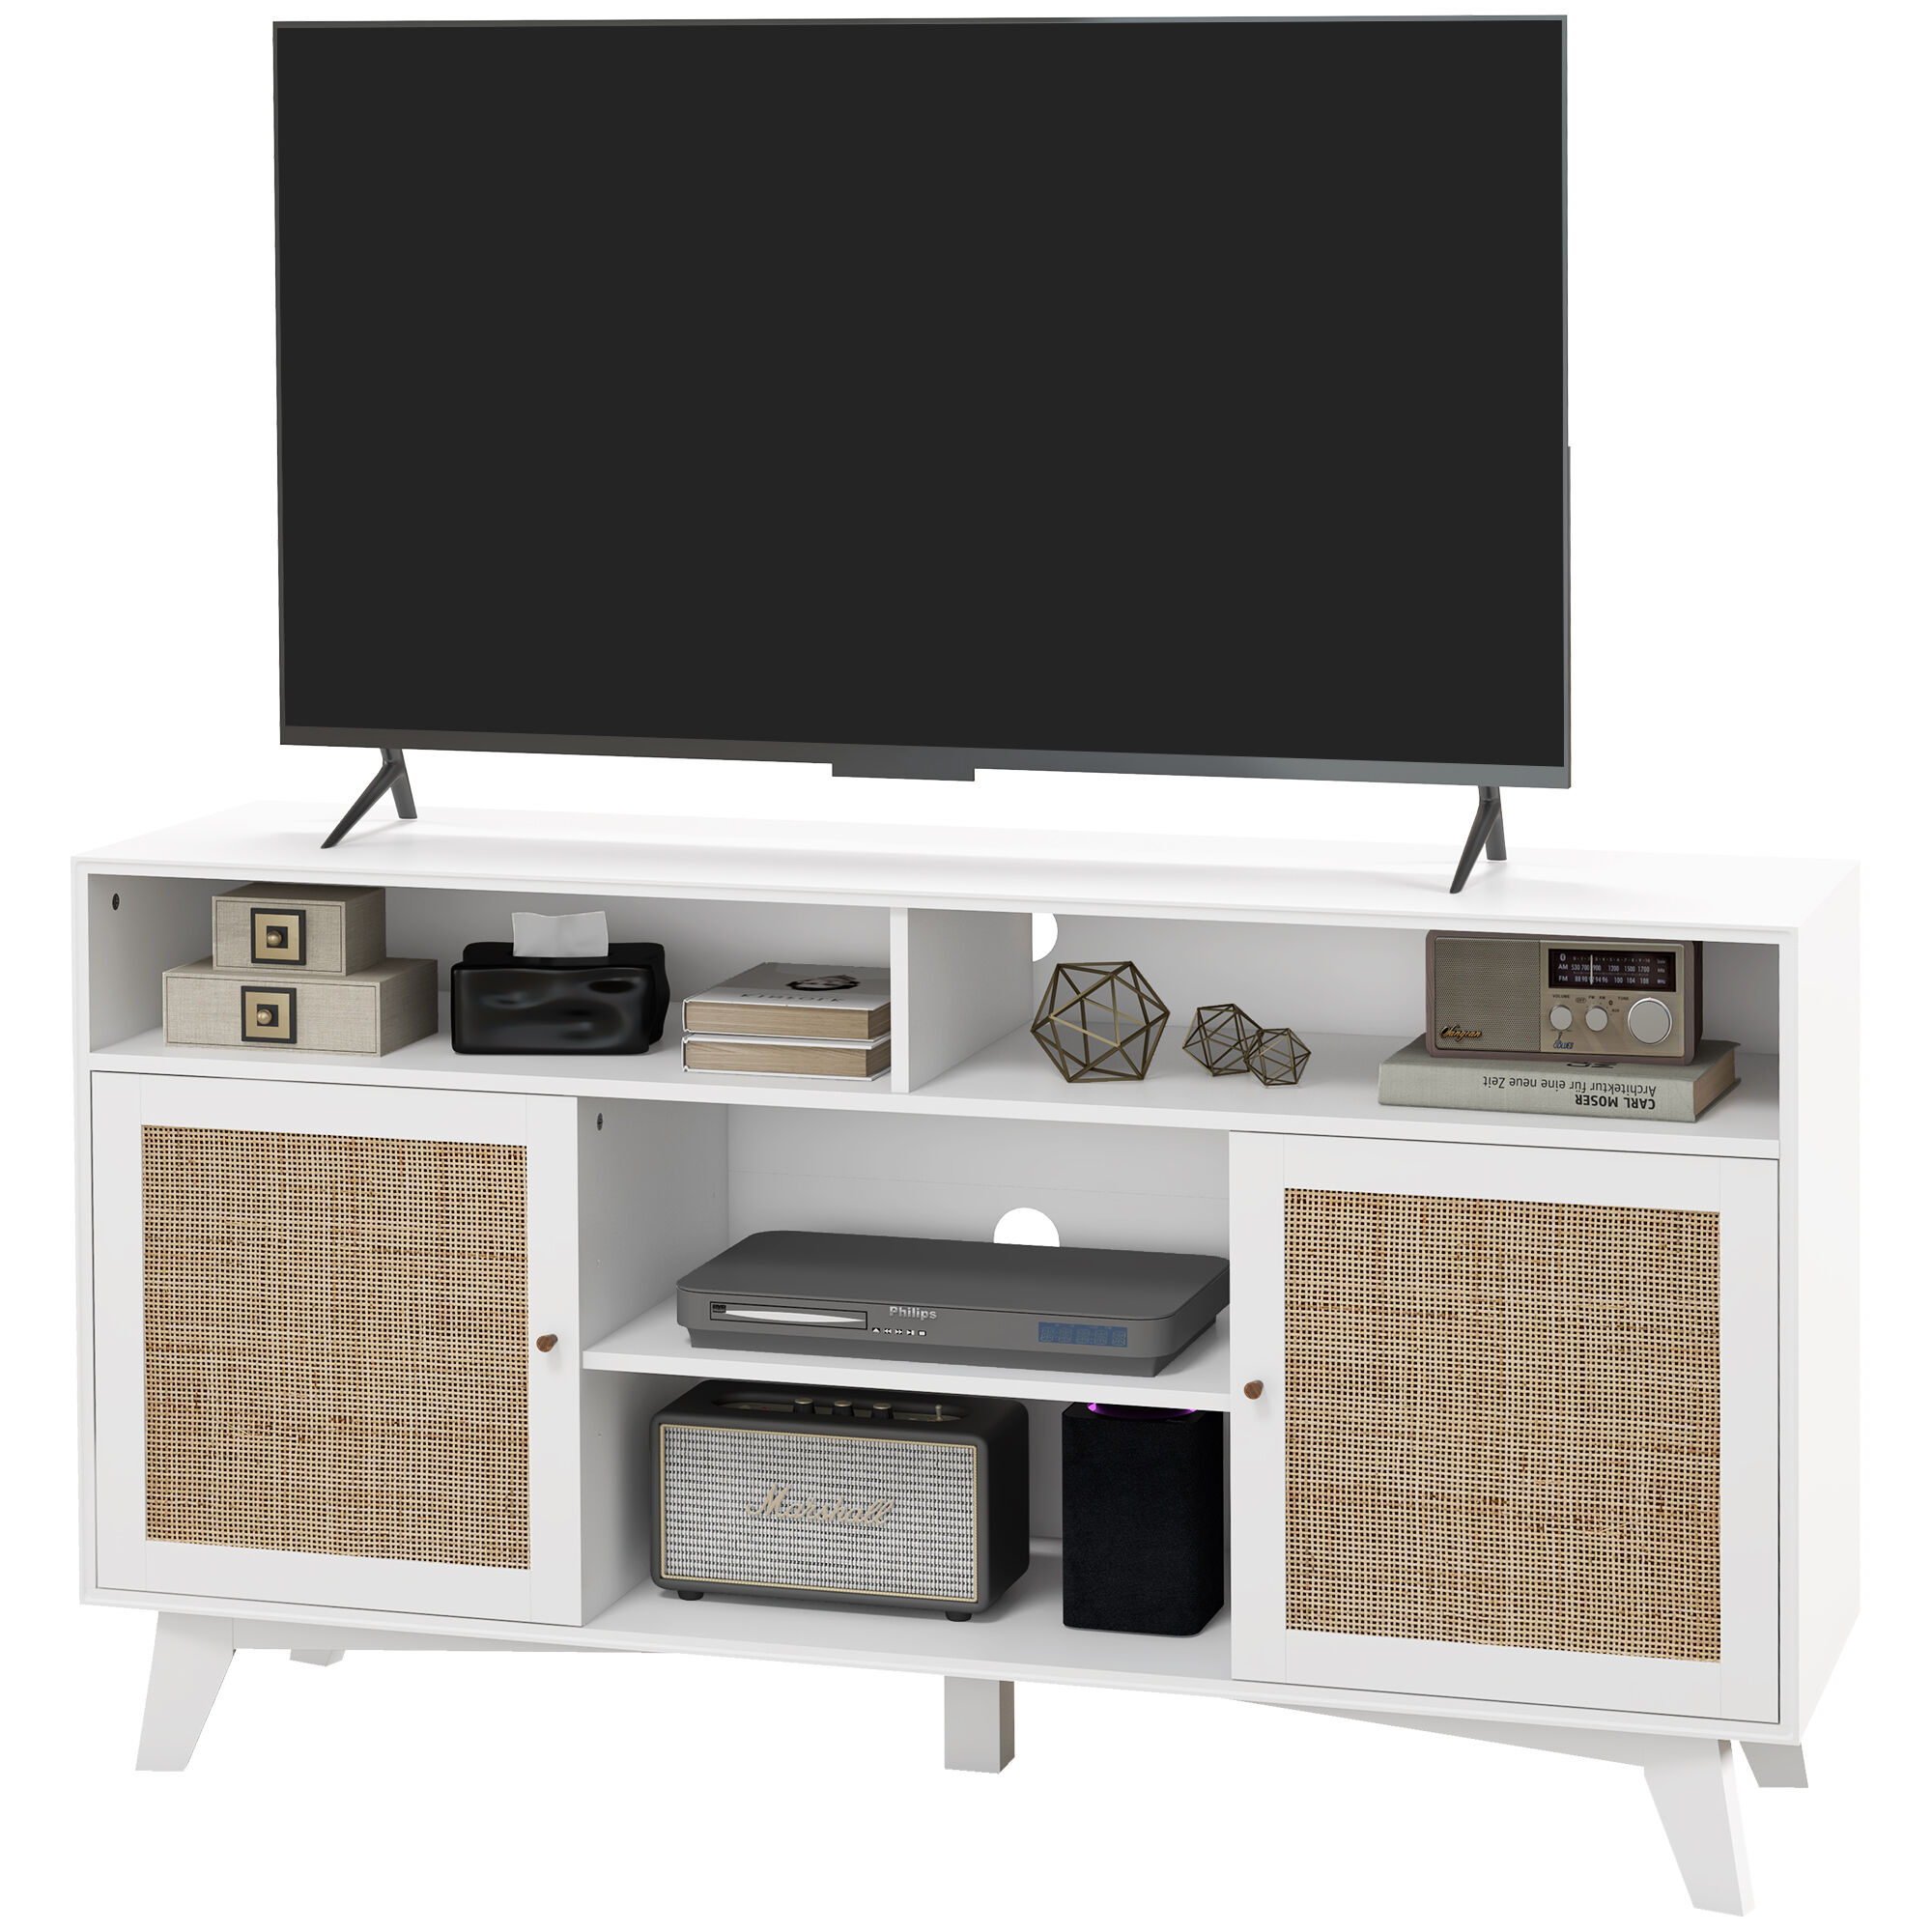 HOMCOM TV Stand Cabinet for 65-Inch, TV Table with 2 Rattan Doors, Television Stand with Adjustable Shelves, 4 Open Shelves